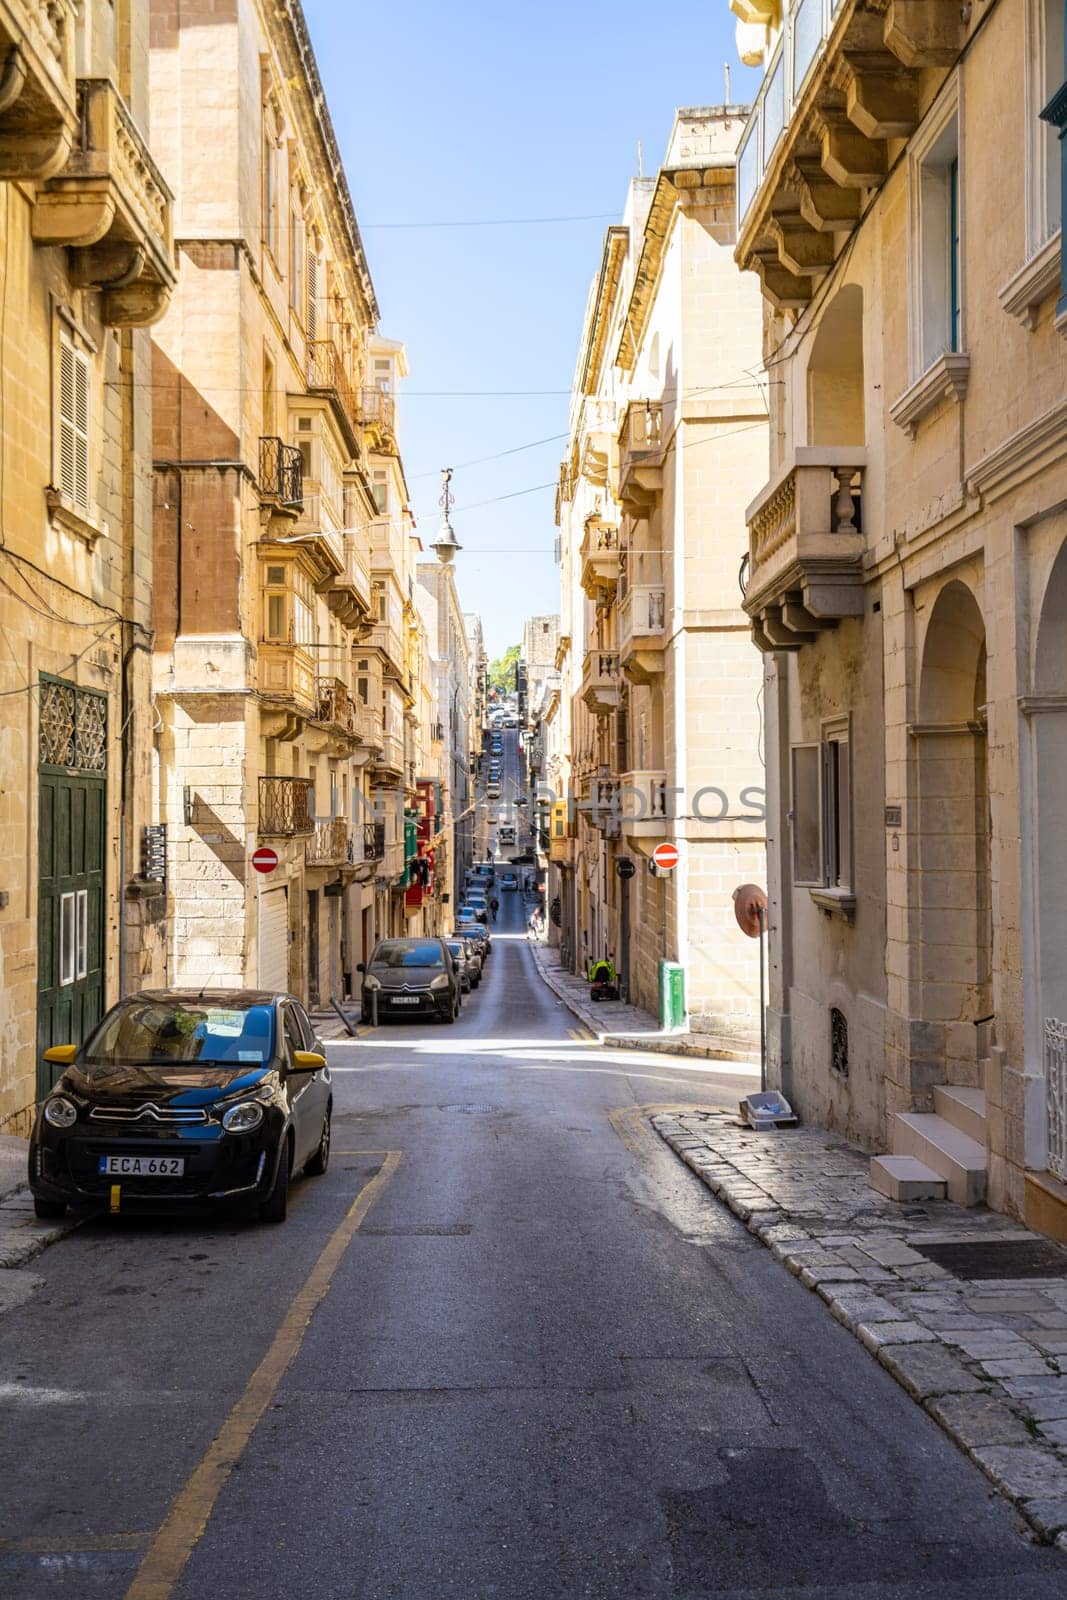 The narrow streets in the center of Valletta, Malta by sergiodv